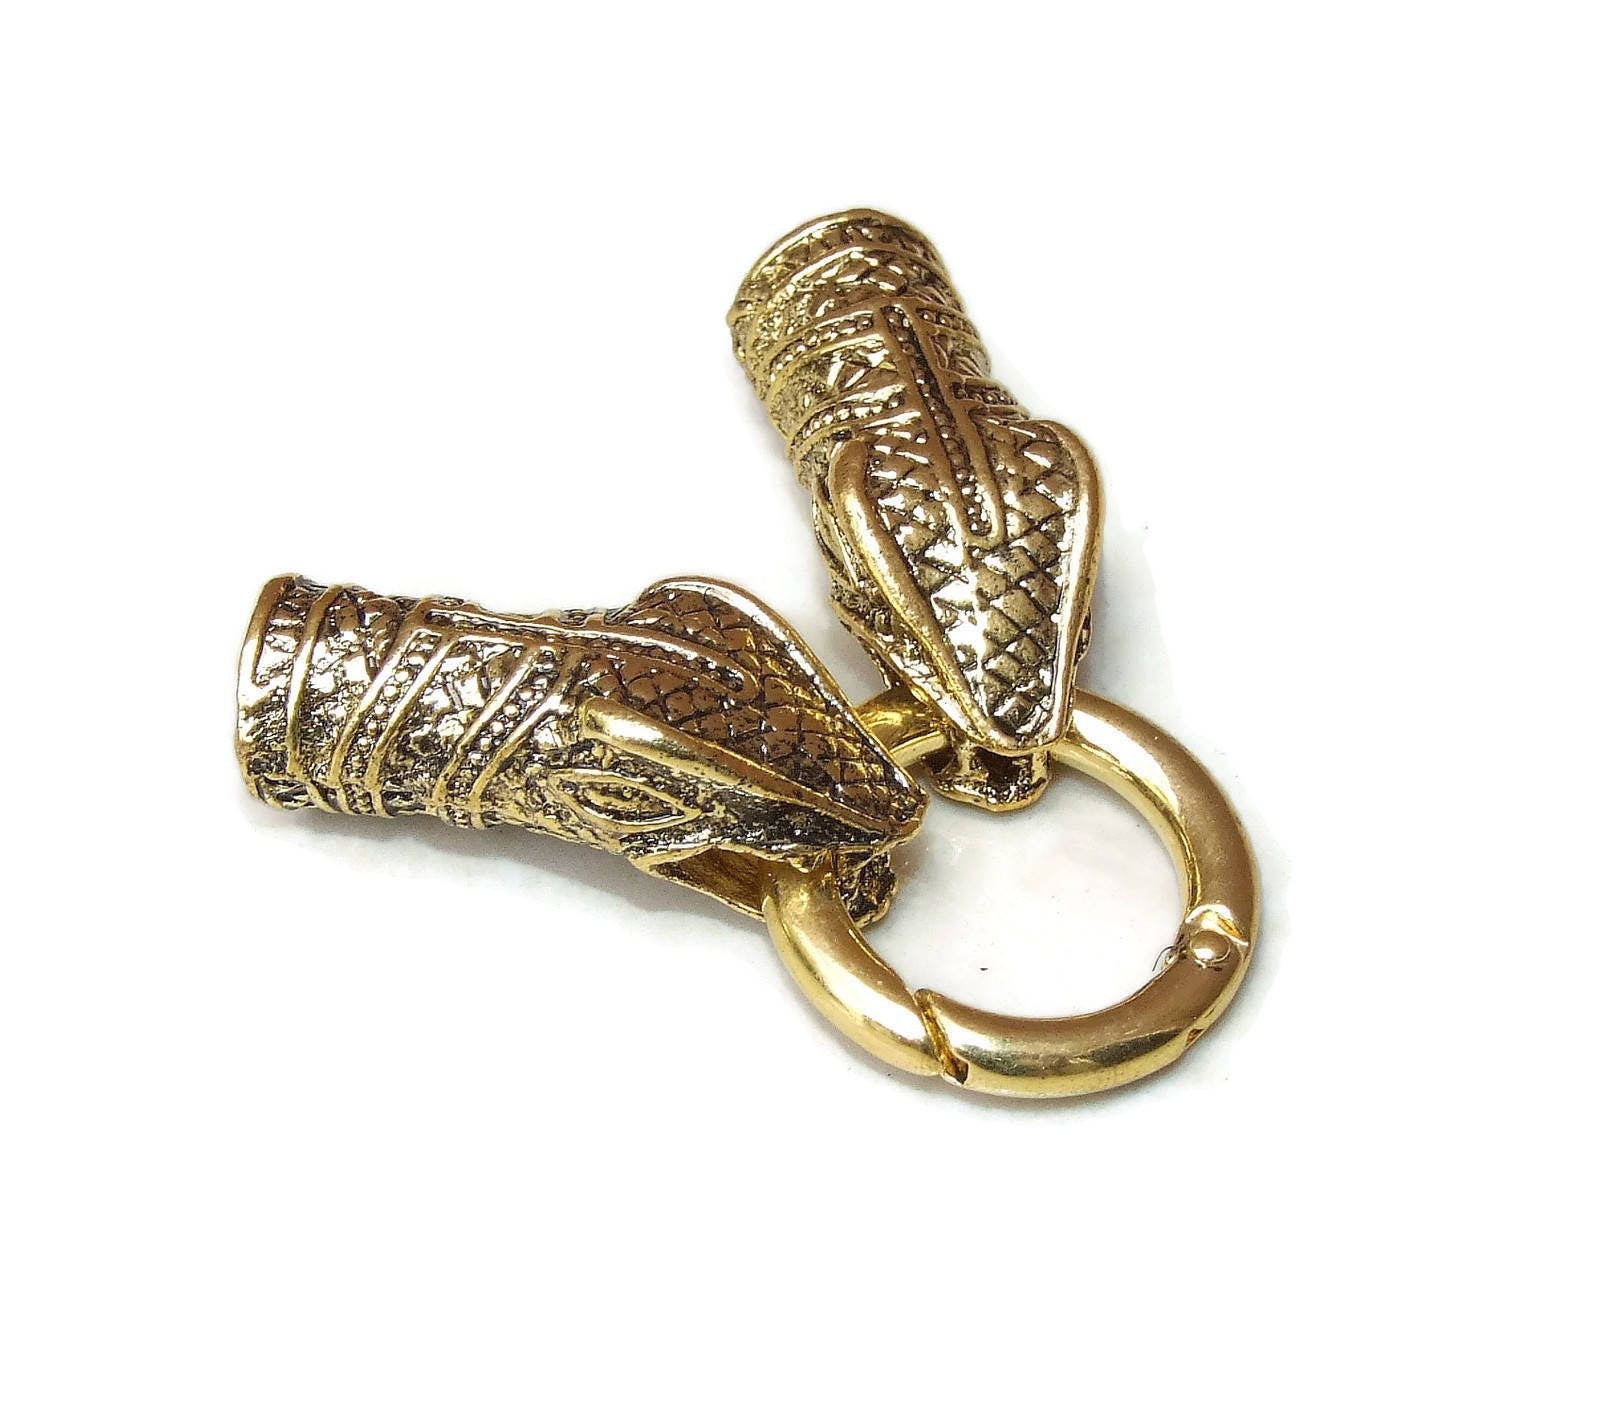 Snake Head Cord End Cap Clasp Lock Ring - Gold Tone - Dragon Head - Necklace Bracelet Clasp - Leather Cord End - Alloy - 11mm x 33mm